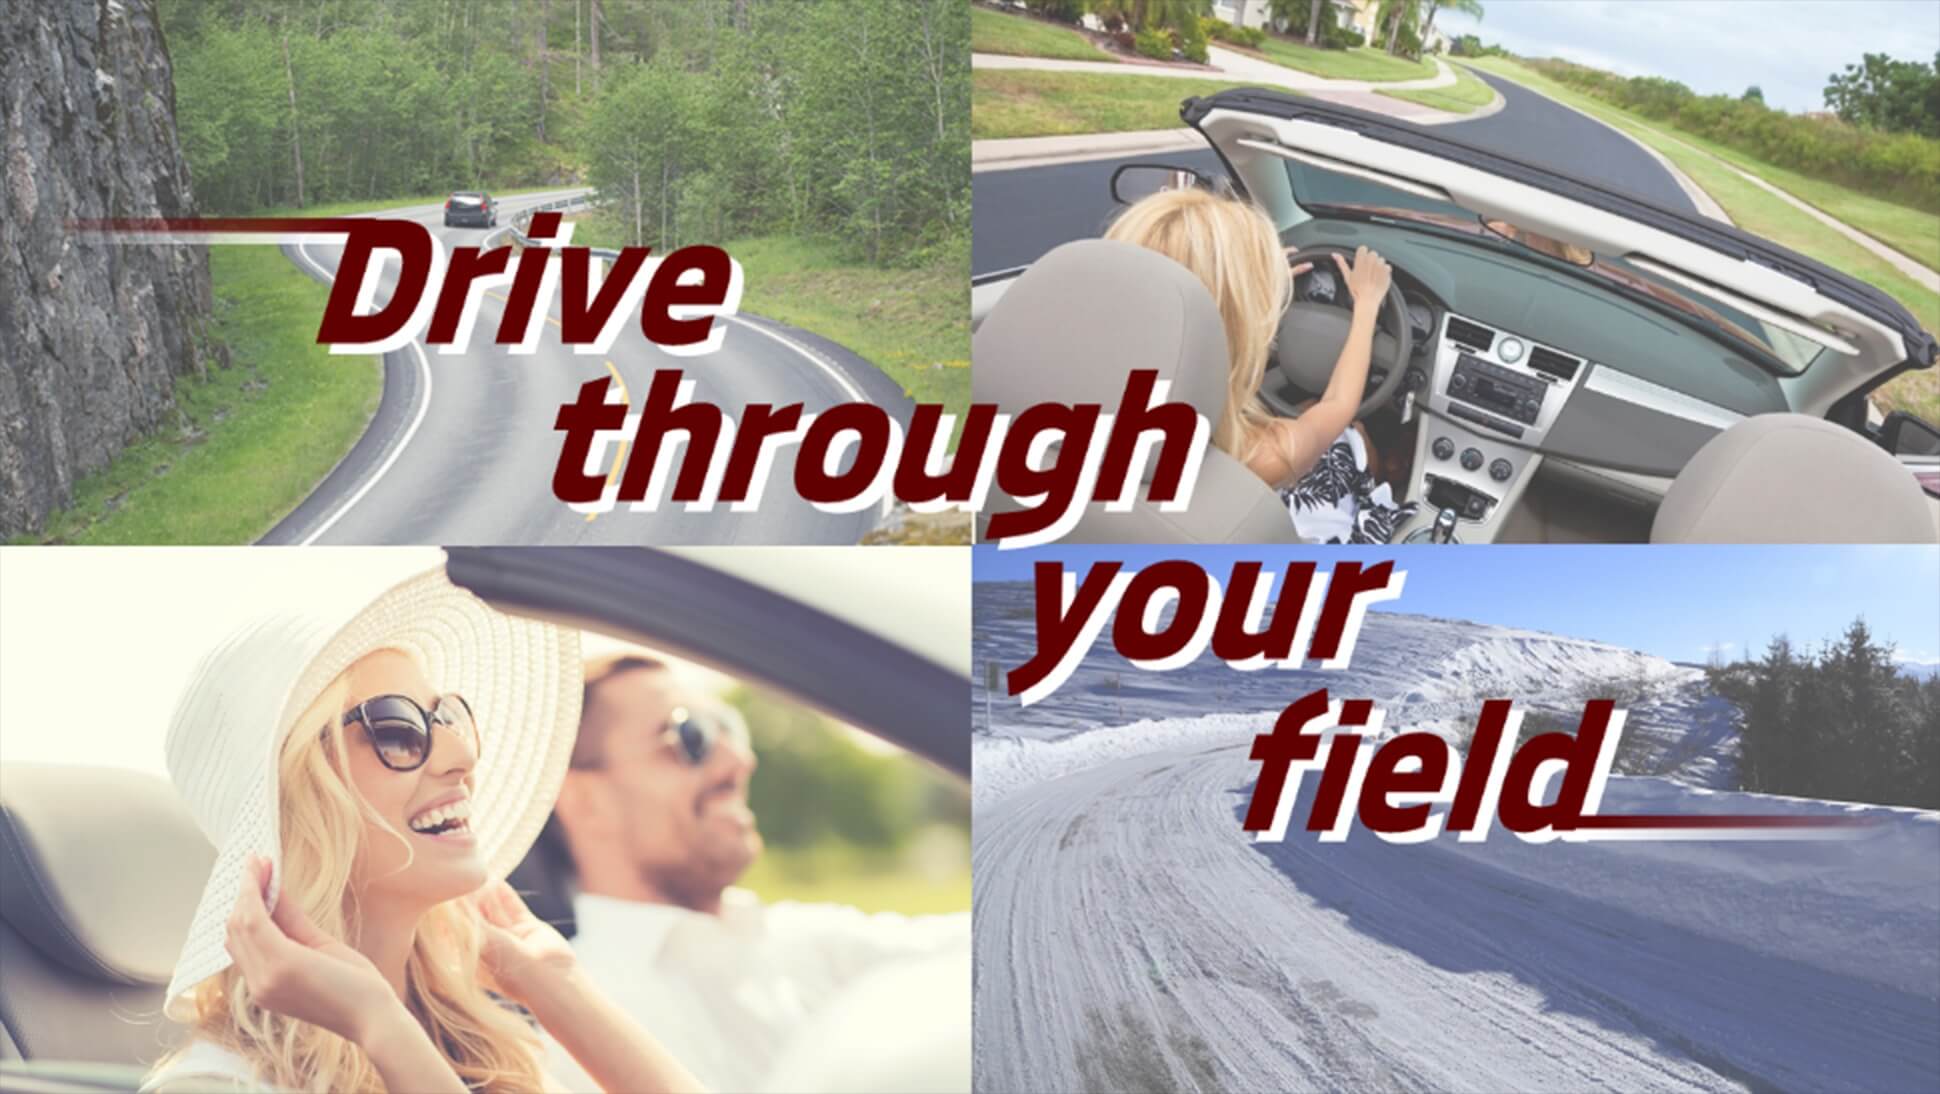 Drive through your field